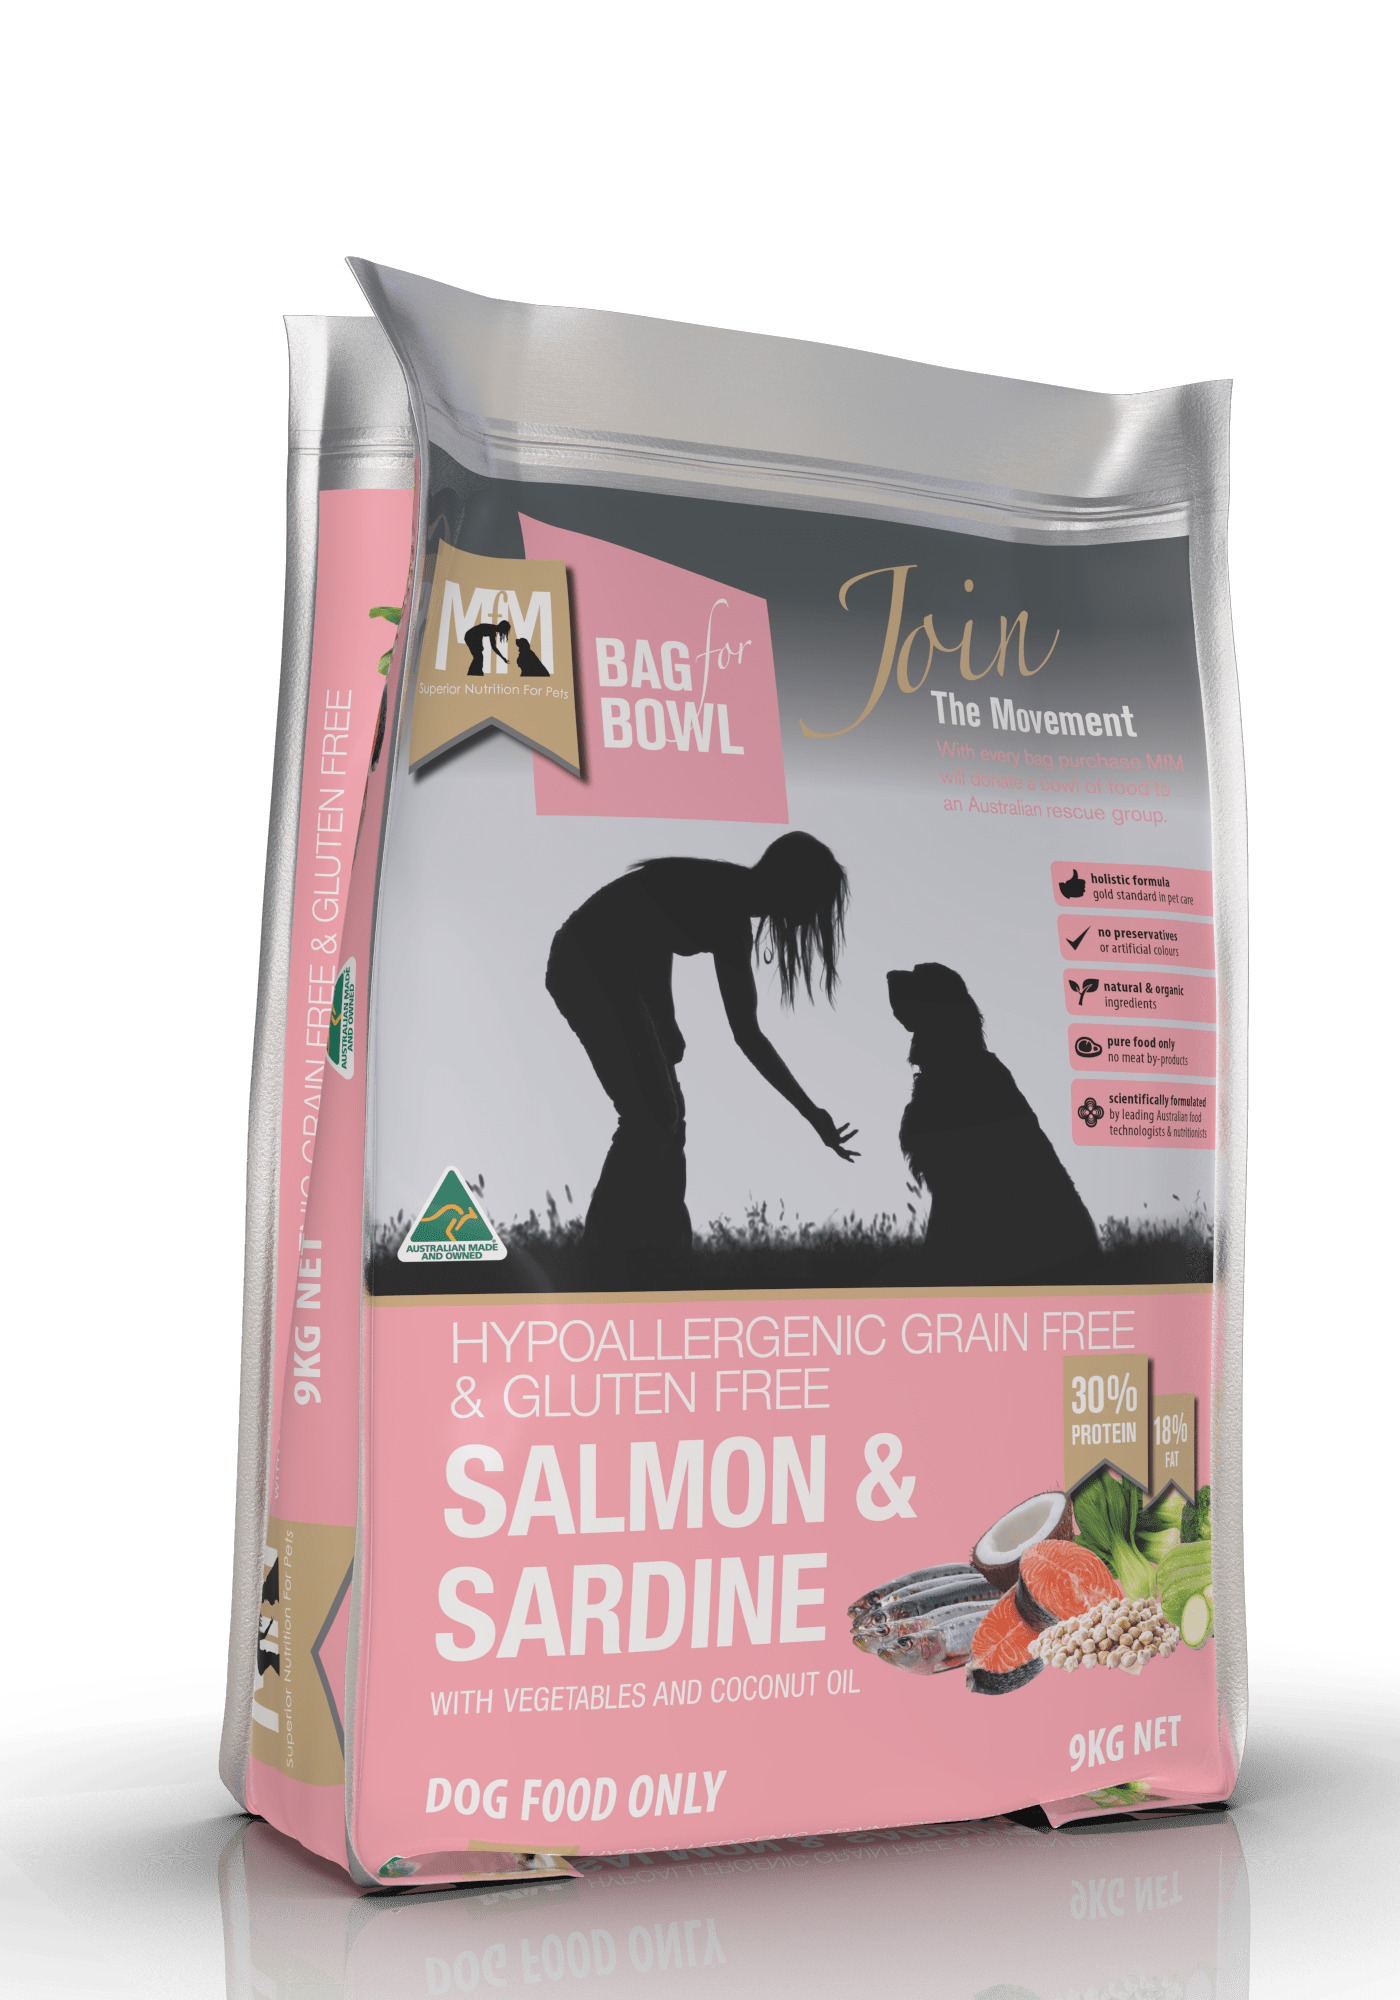 Meals For Mutts Dog Dry Food Default Meals For Mutts Dog Grain Free Salmon & Sardine 9Kg